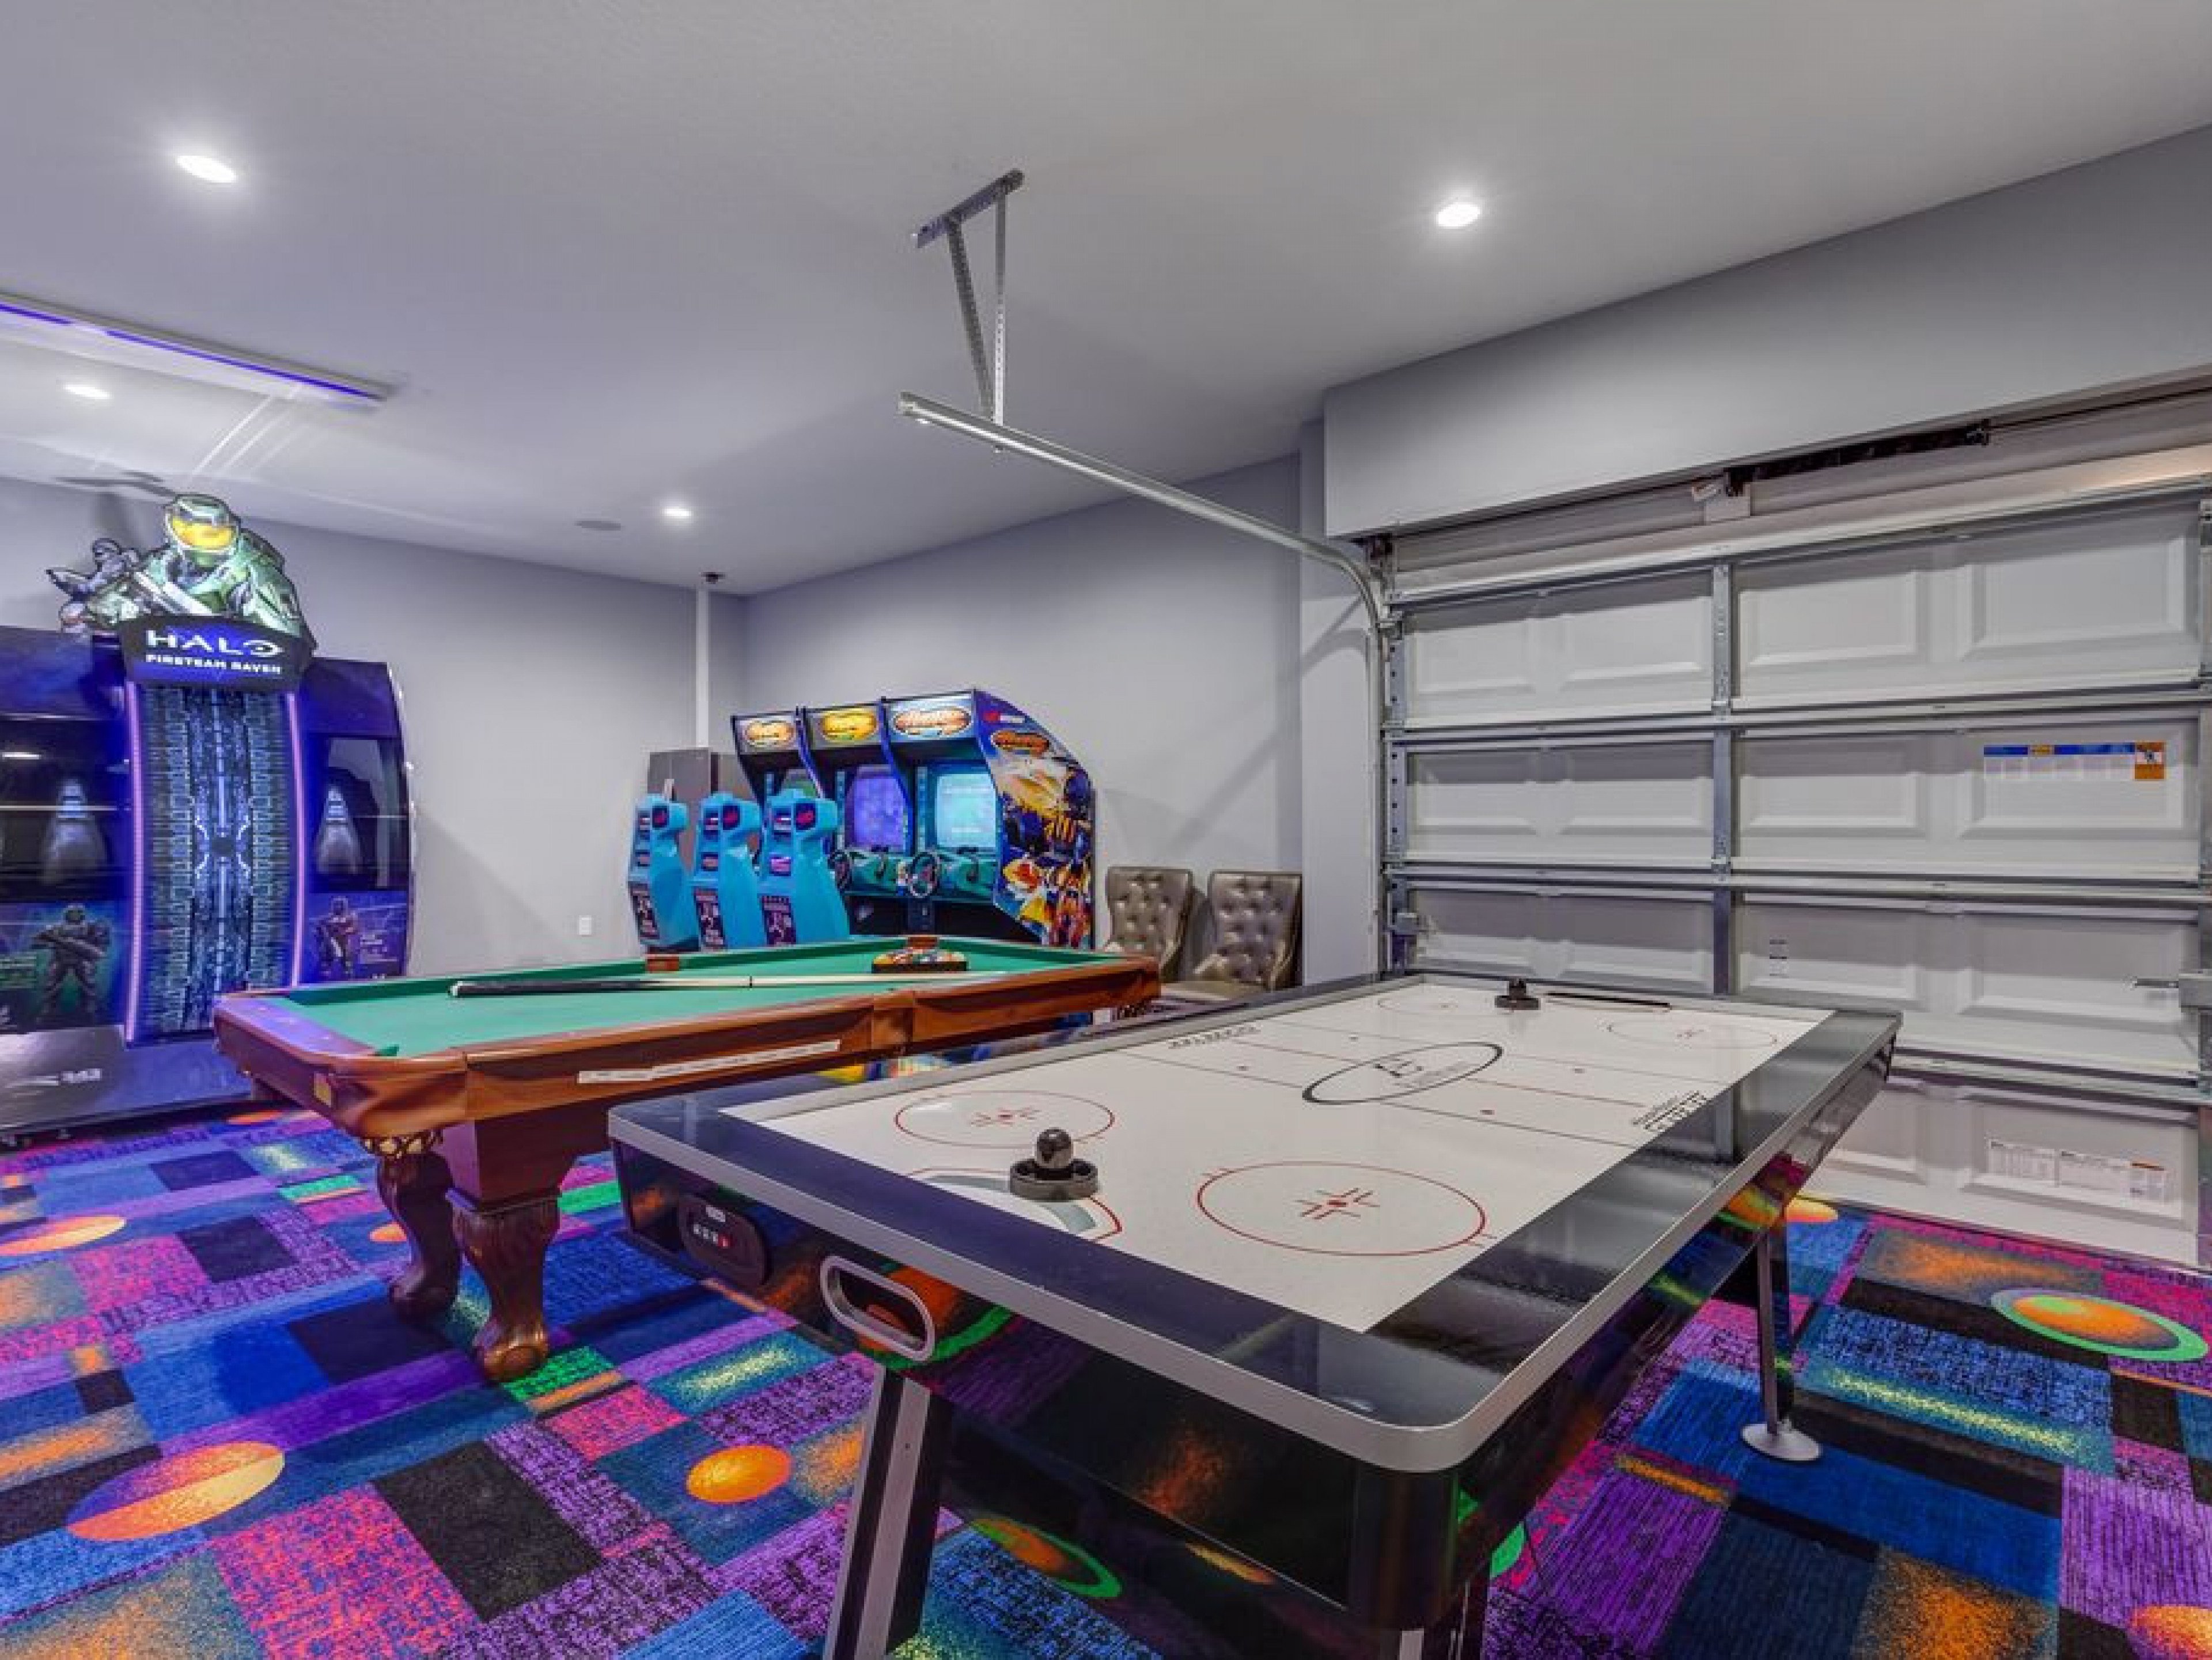 Solterra Resort 7 vacation rentals with bowling alleys